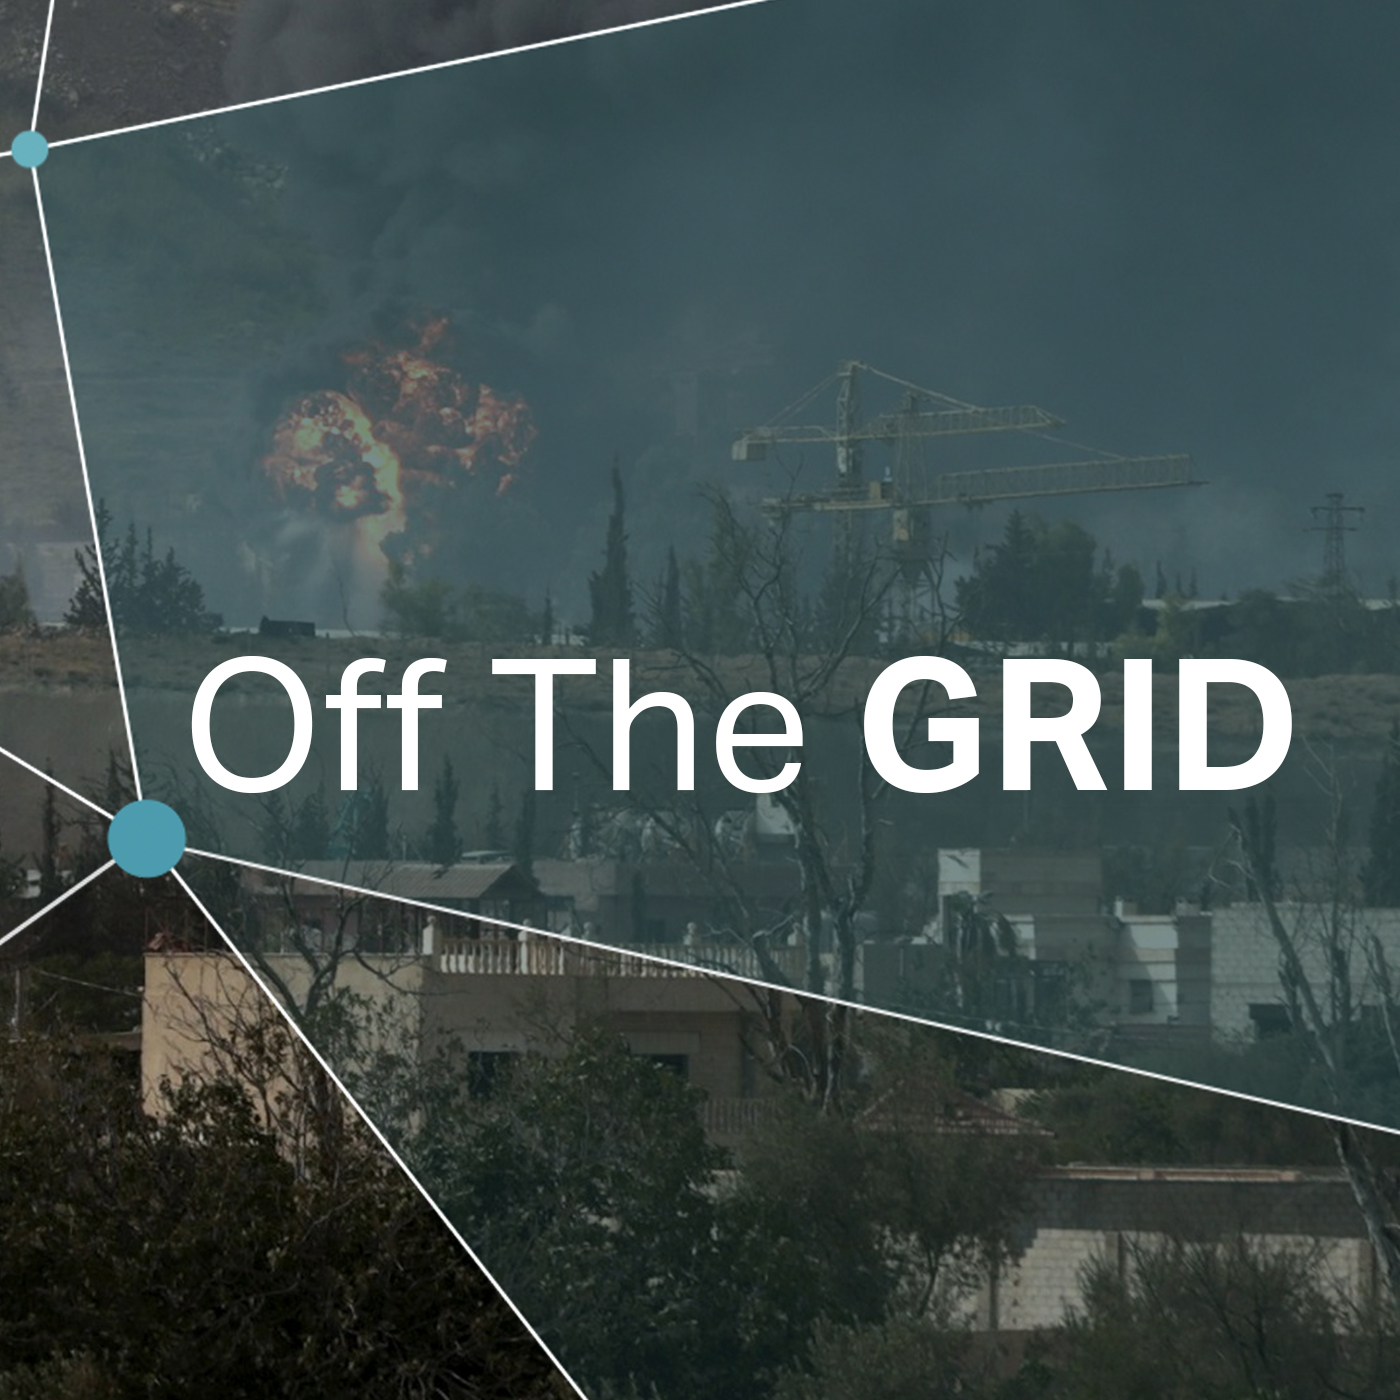 Iran - Under sanctions | Off The Grid | Documentary